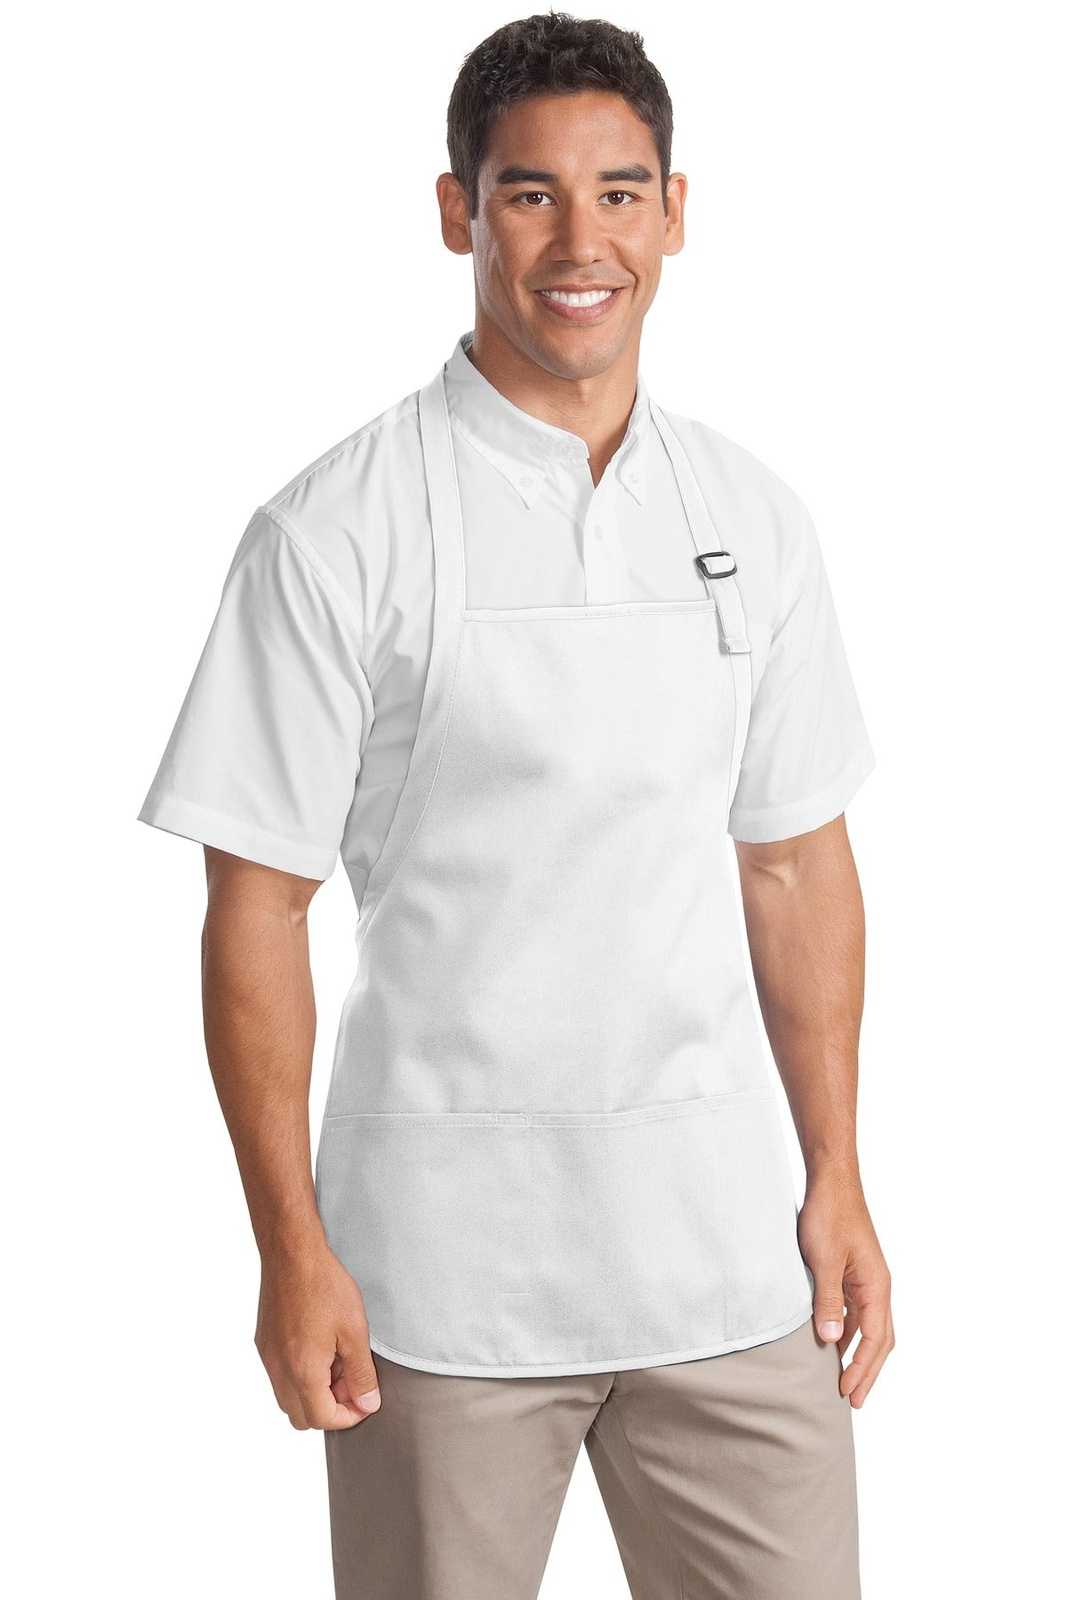 Port Authority A510 Medium-Length Apron with Pouch Pockets - White - HIT a Double - 1